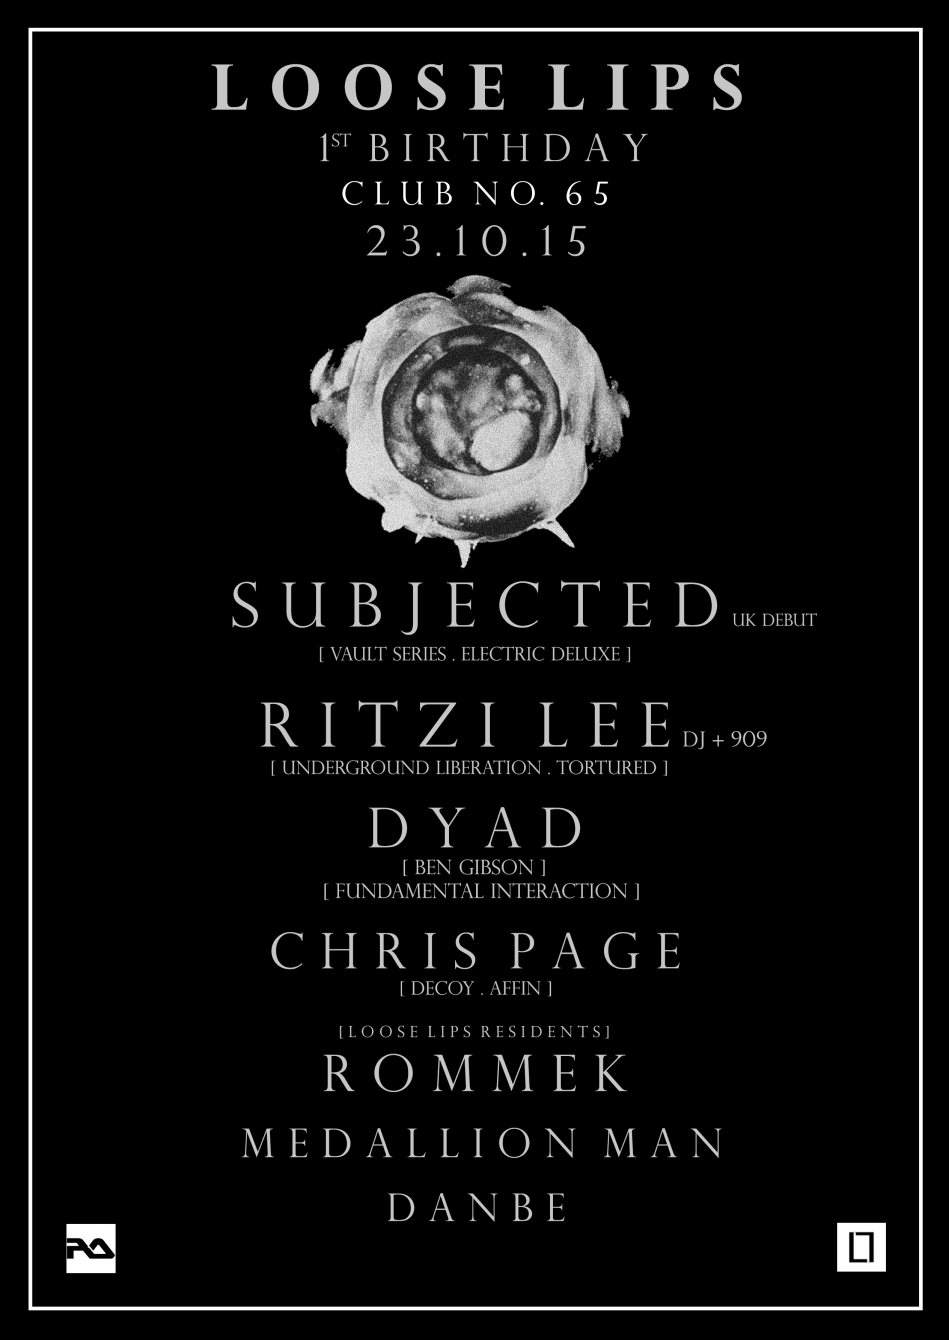 Loose Lips 1st Birthday - Subjected (UK Debut), Ritzi Lee + 909, Dyad, Chris Page & More - Página frontal